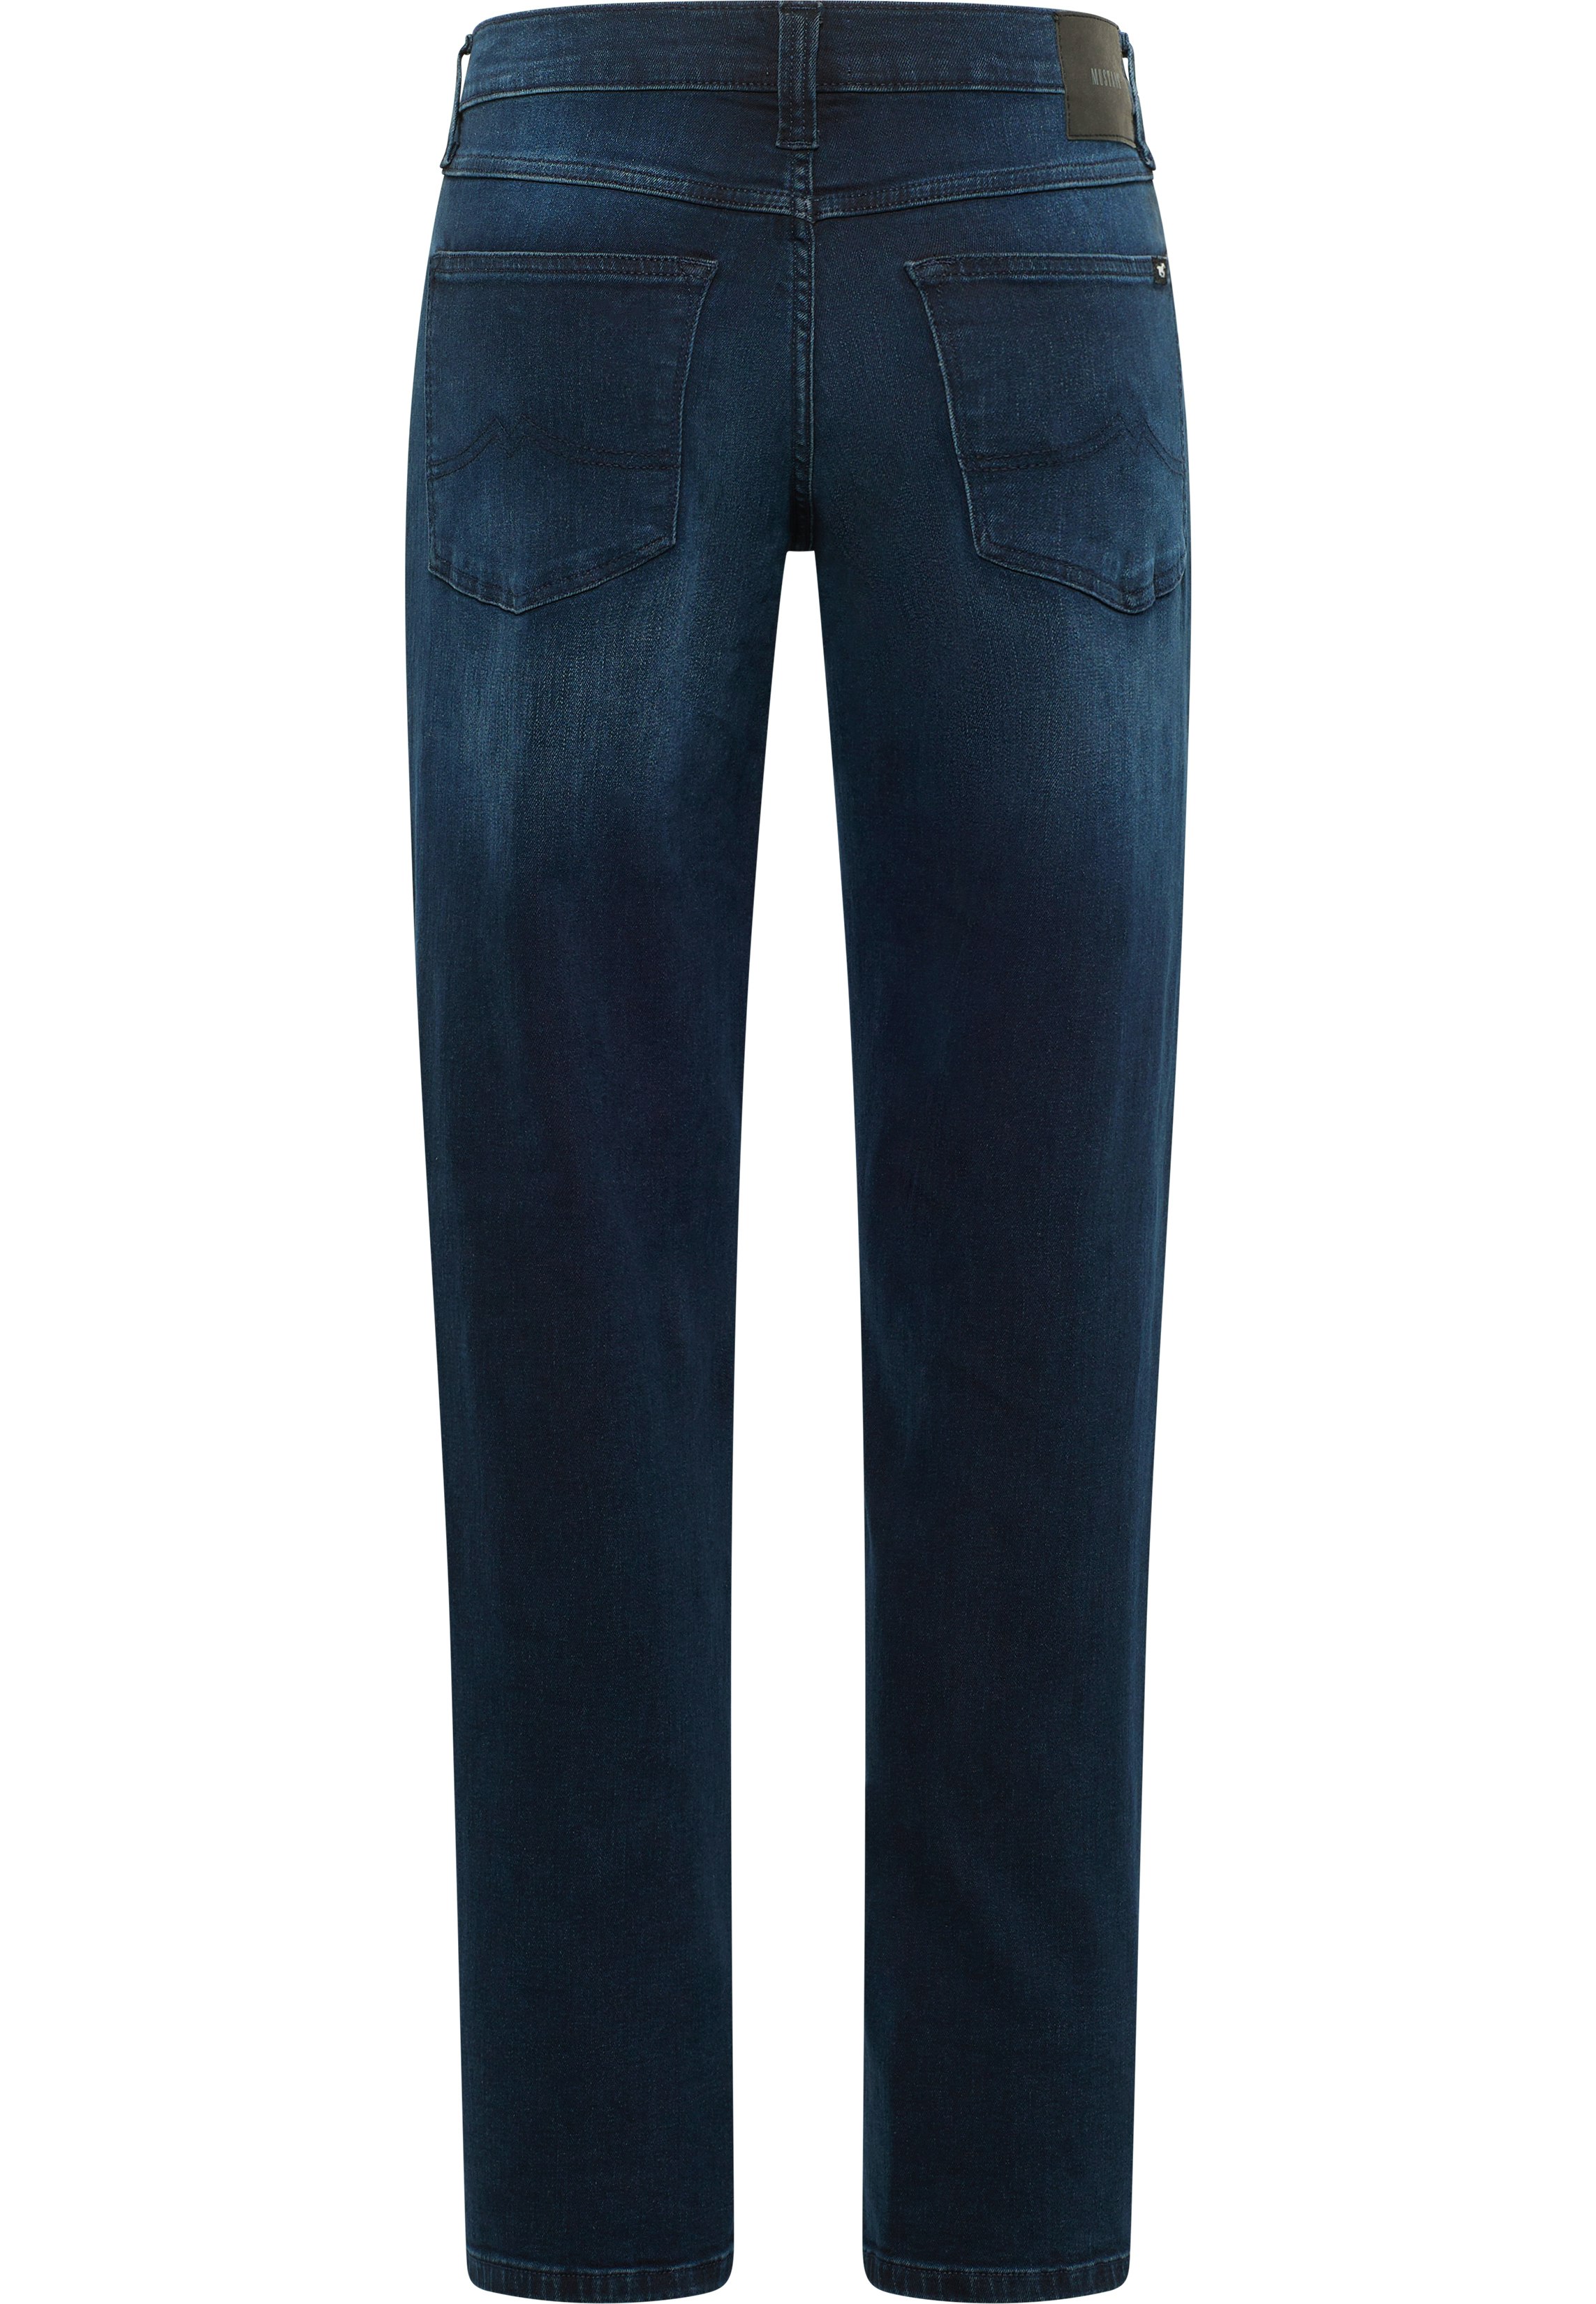 Mustang Jeans Big Sur Straight deep blue used extra lang